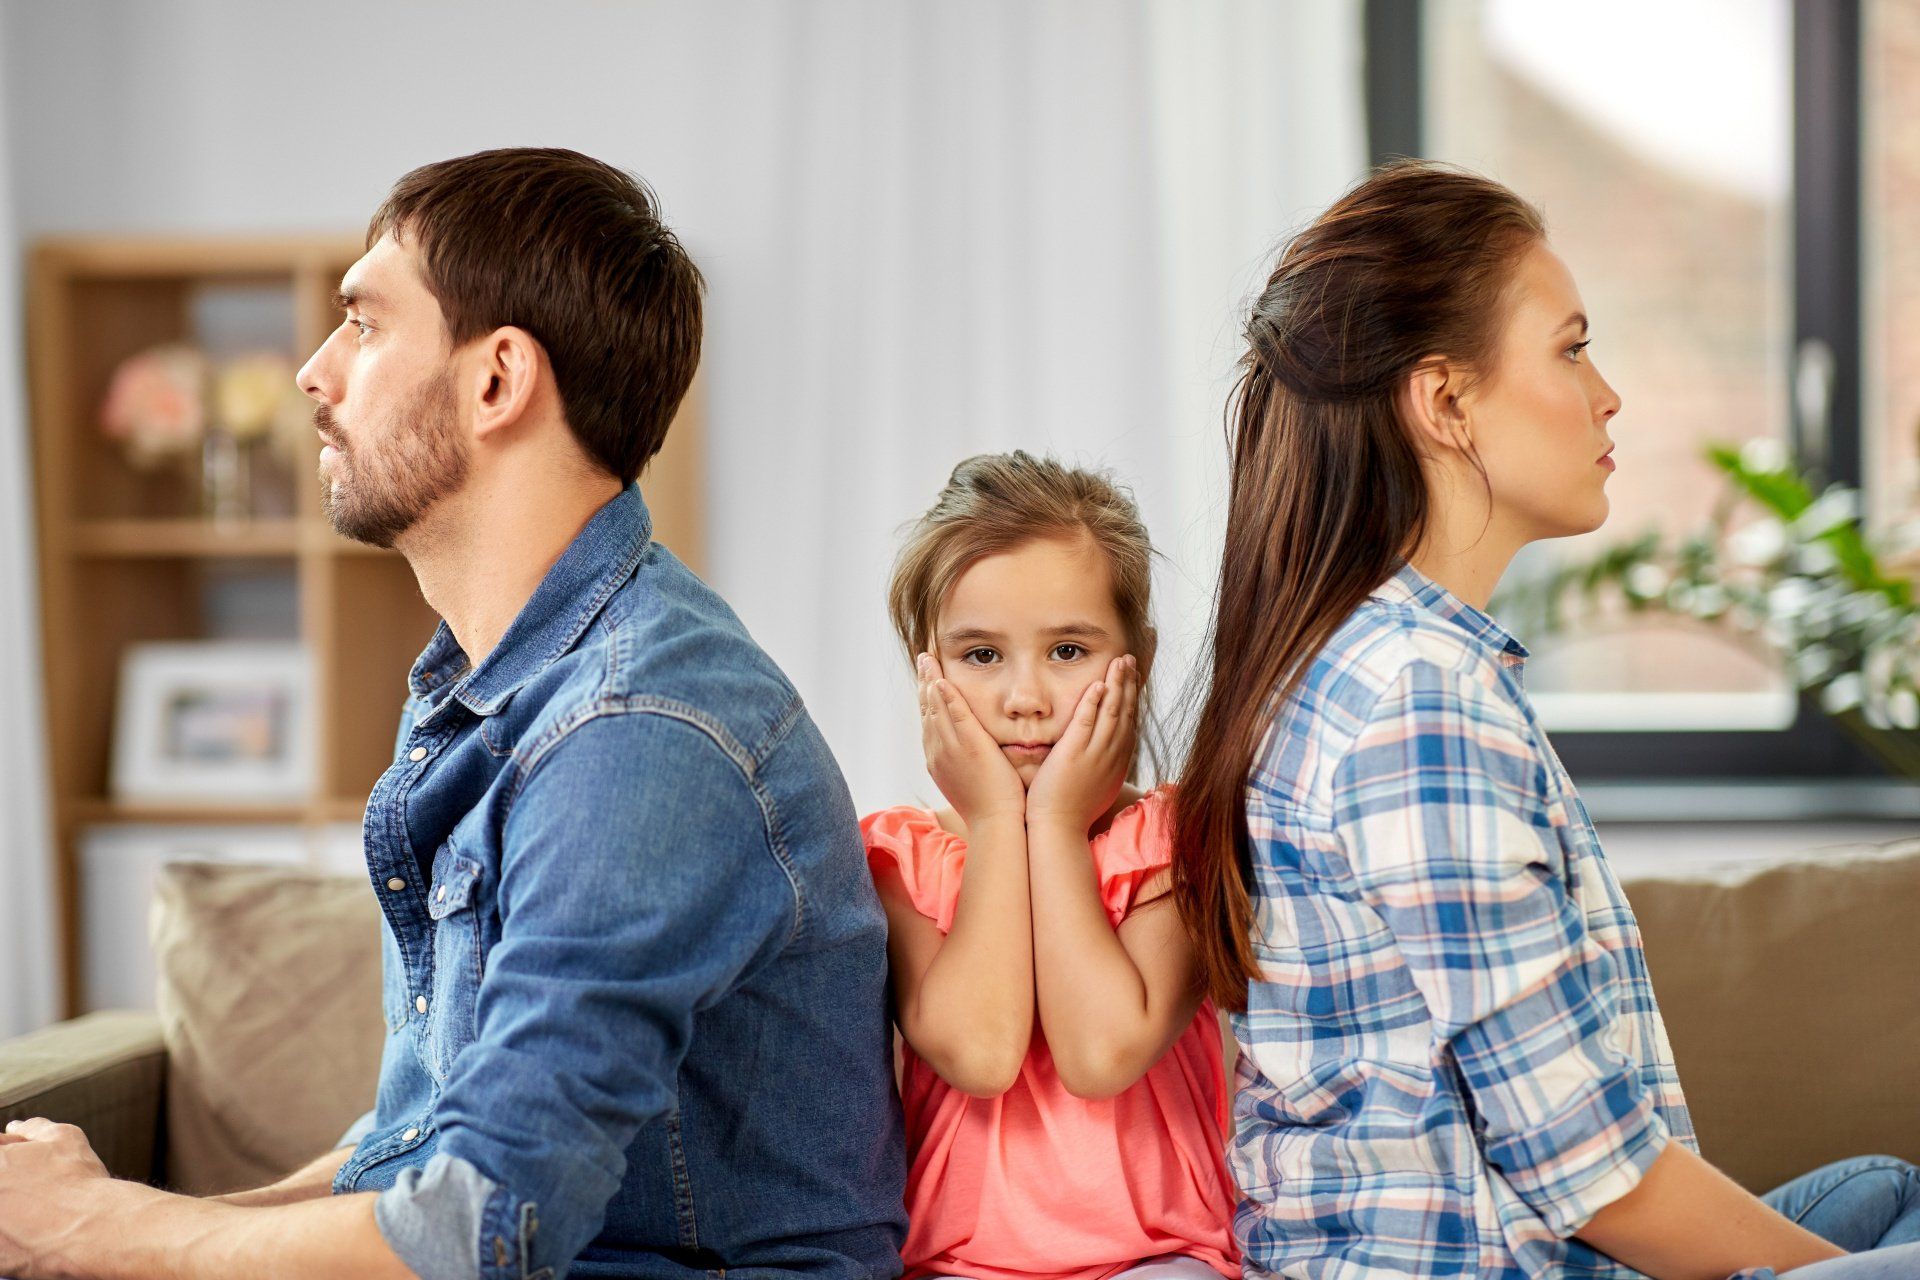 Man look right dark hair in a denim shirt. Women looking to the right dark hair checked shirt. A little girl sits in the middle looking straight on with her head in hands. SHe has a peach top on with mousey hair.